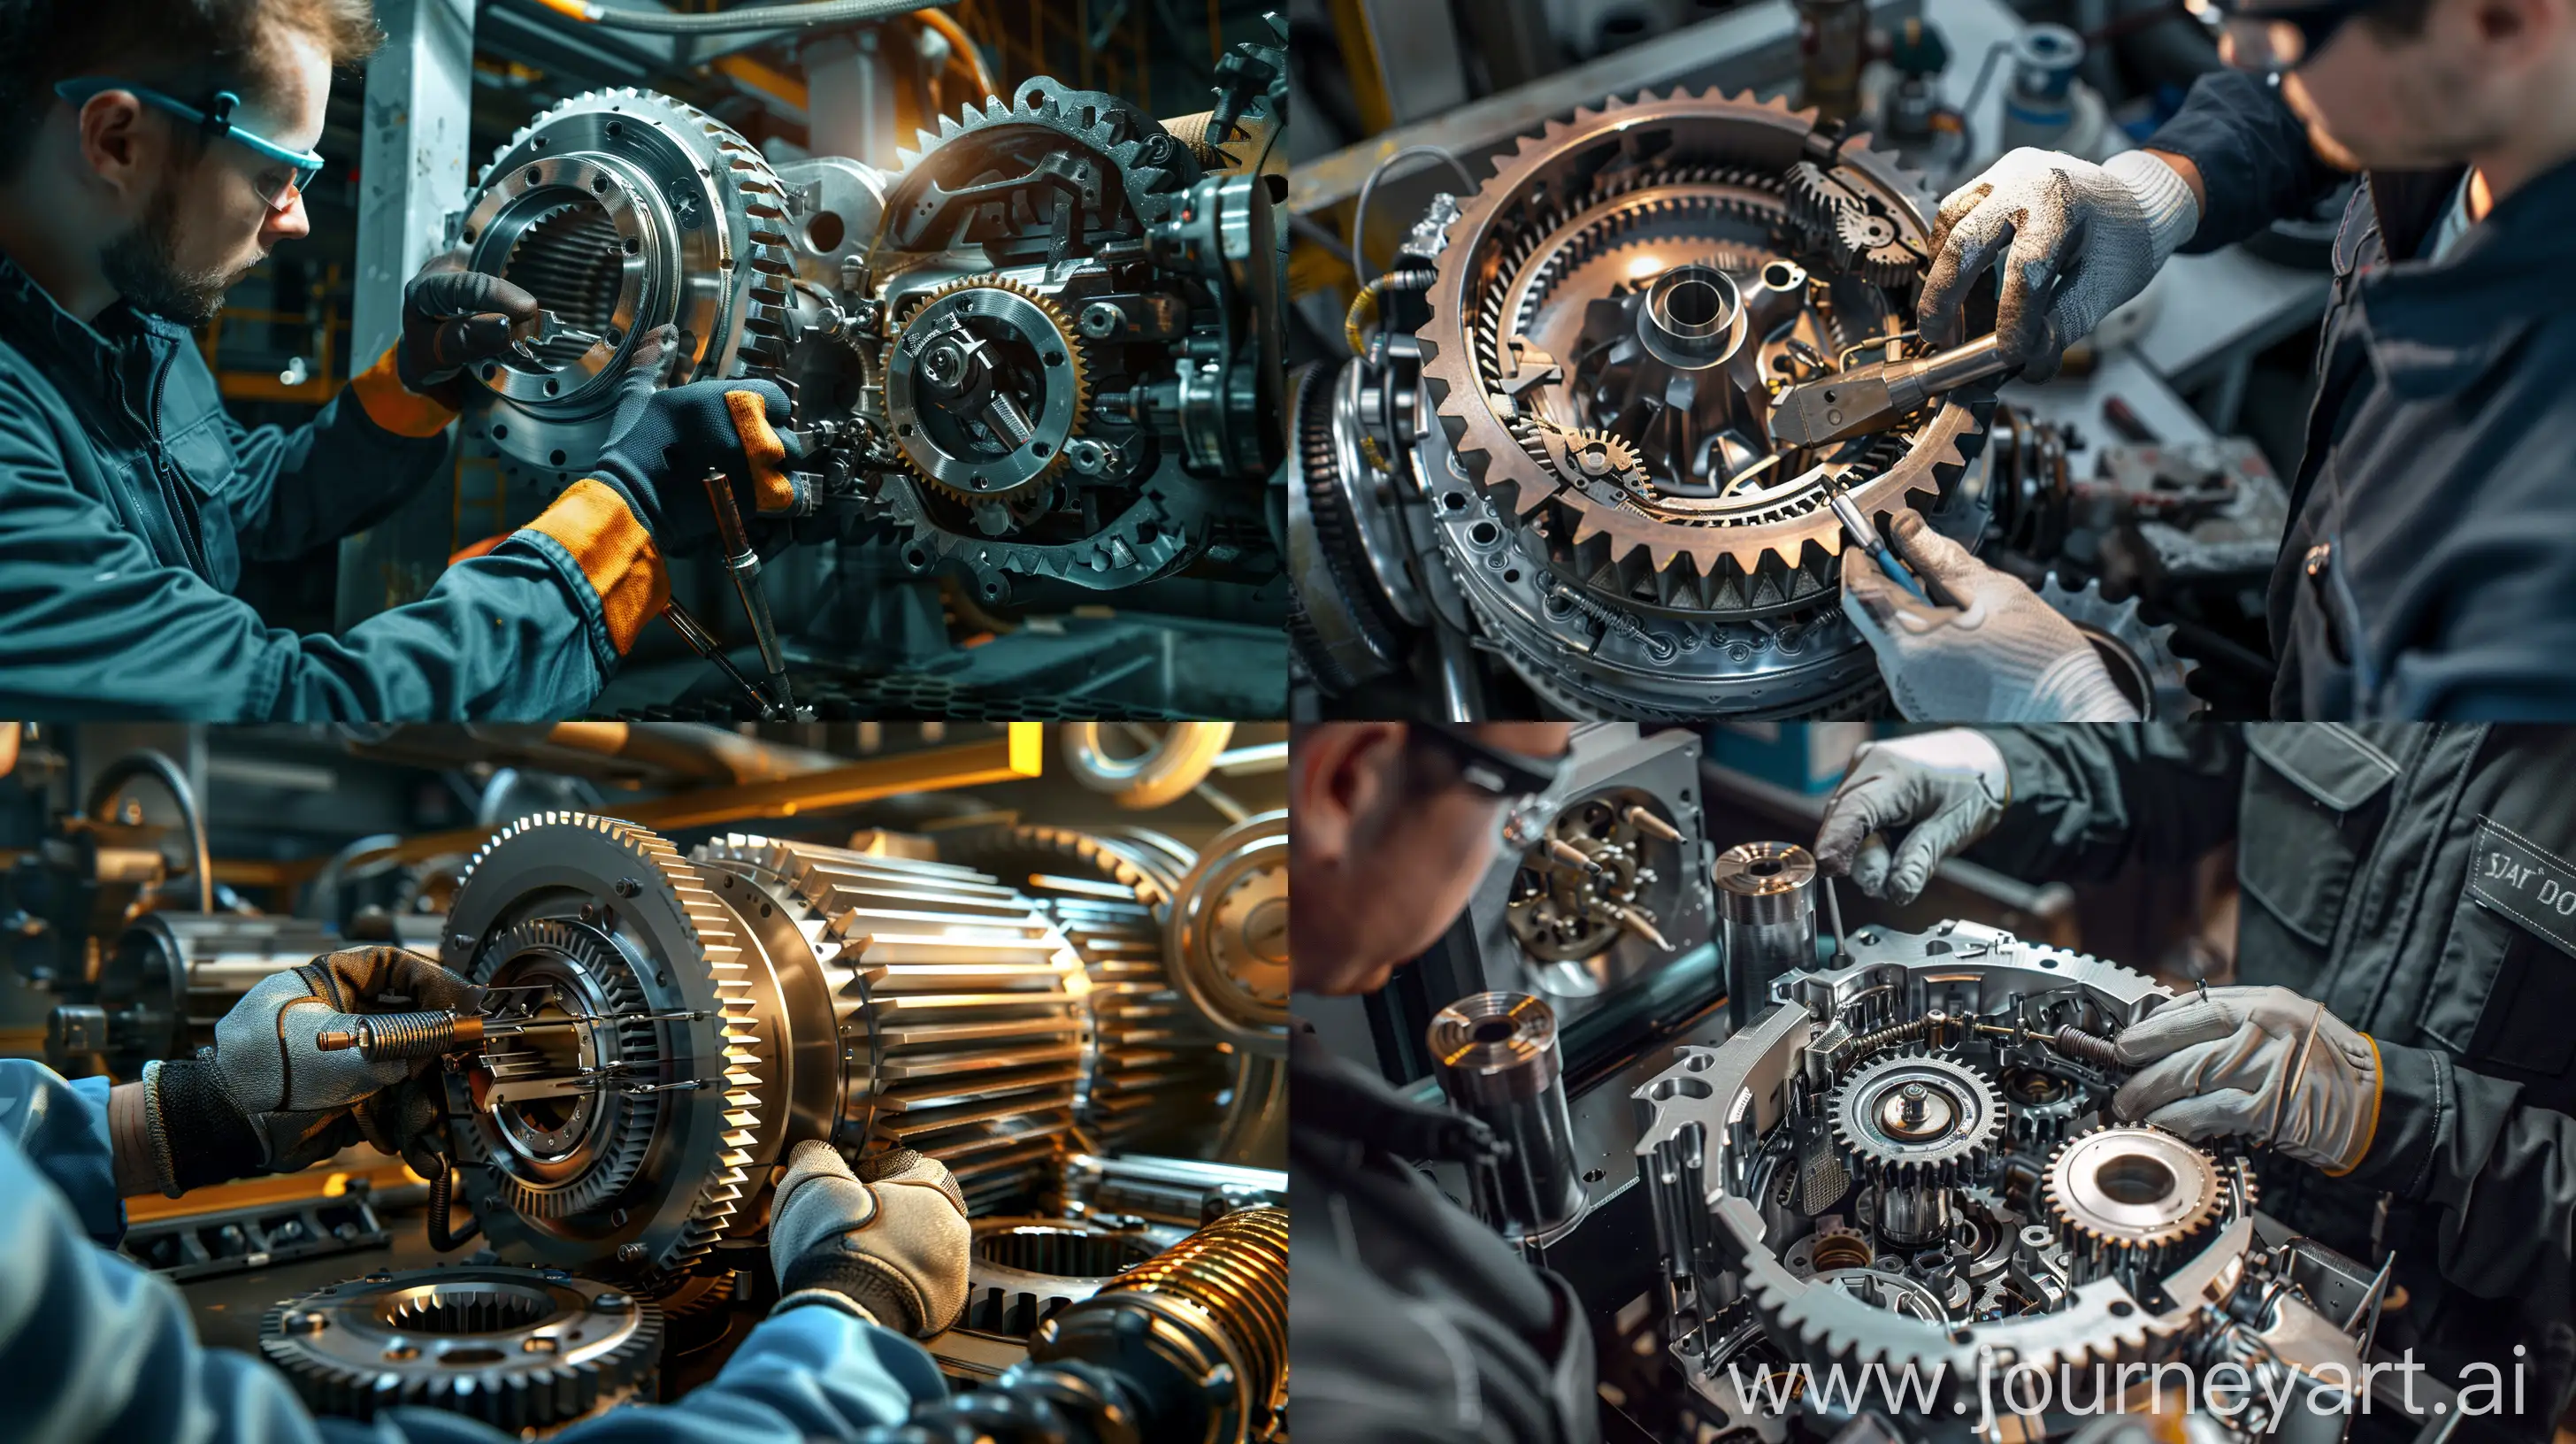 A photorealistic image of an industrial solar gearbox undergoing repair, with its internal components clearly visible. The gearbox should be large and complex, with a variety of gears, shafts, and bearings. The repair technician should be wearing gloves and safety glasses, and they should be using a variety of tools to disassemble and repair the gearbox. The lighting should be bright and clear, and the image should be in focus. --ar 16:9